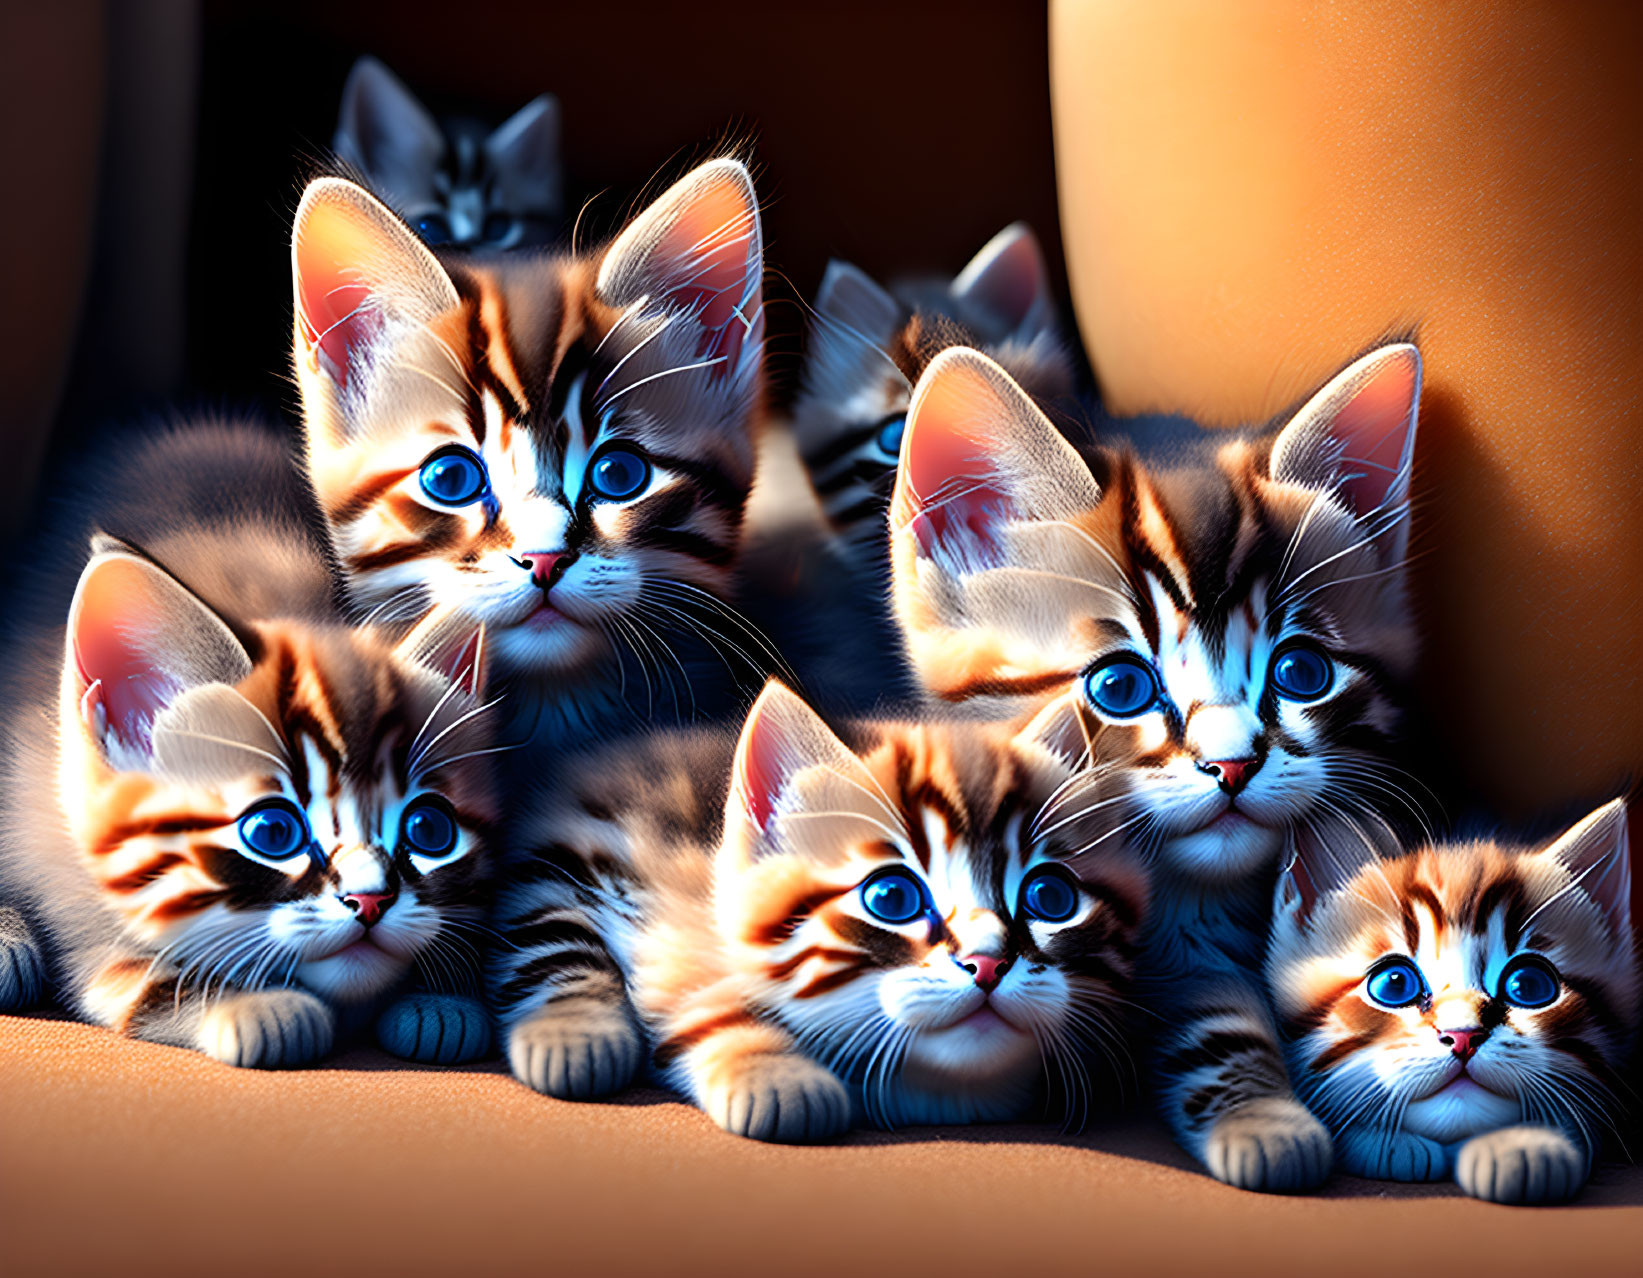 Cute Kittens with Blue Eyes and Brown Striped Fur on Orange Surface